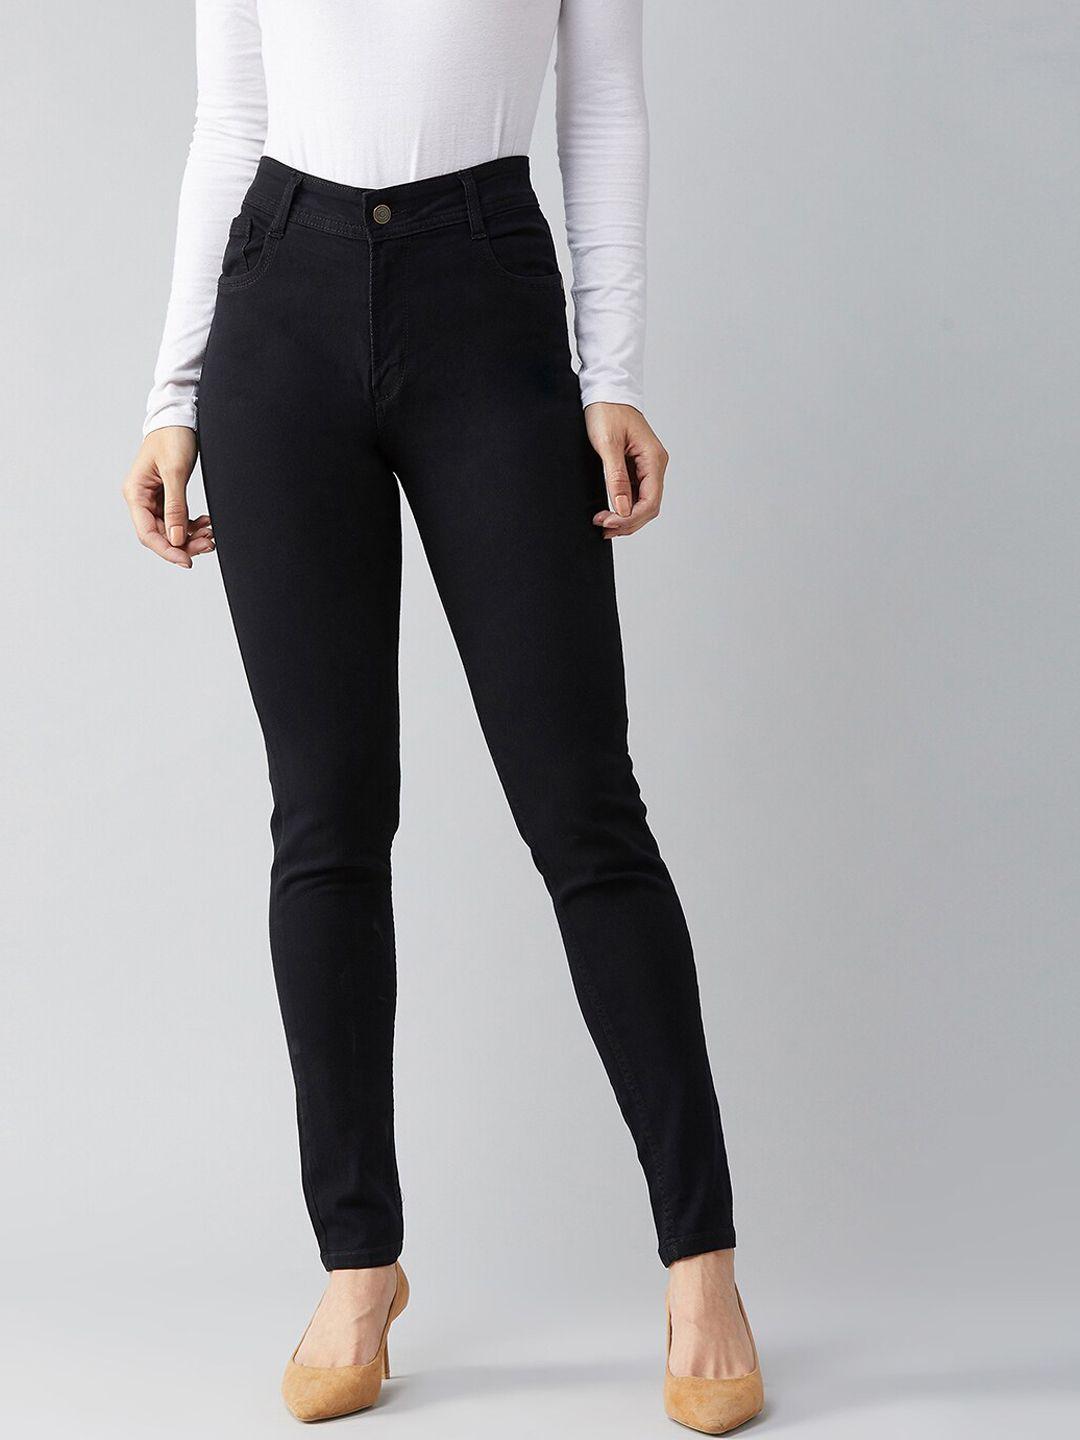 dolce-crudo-women-black-slim-fit-high-rise-stretchable-jeans